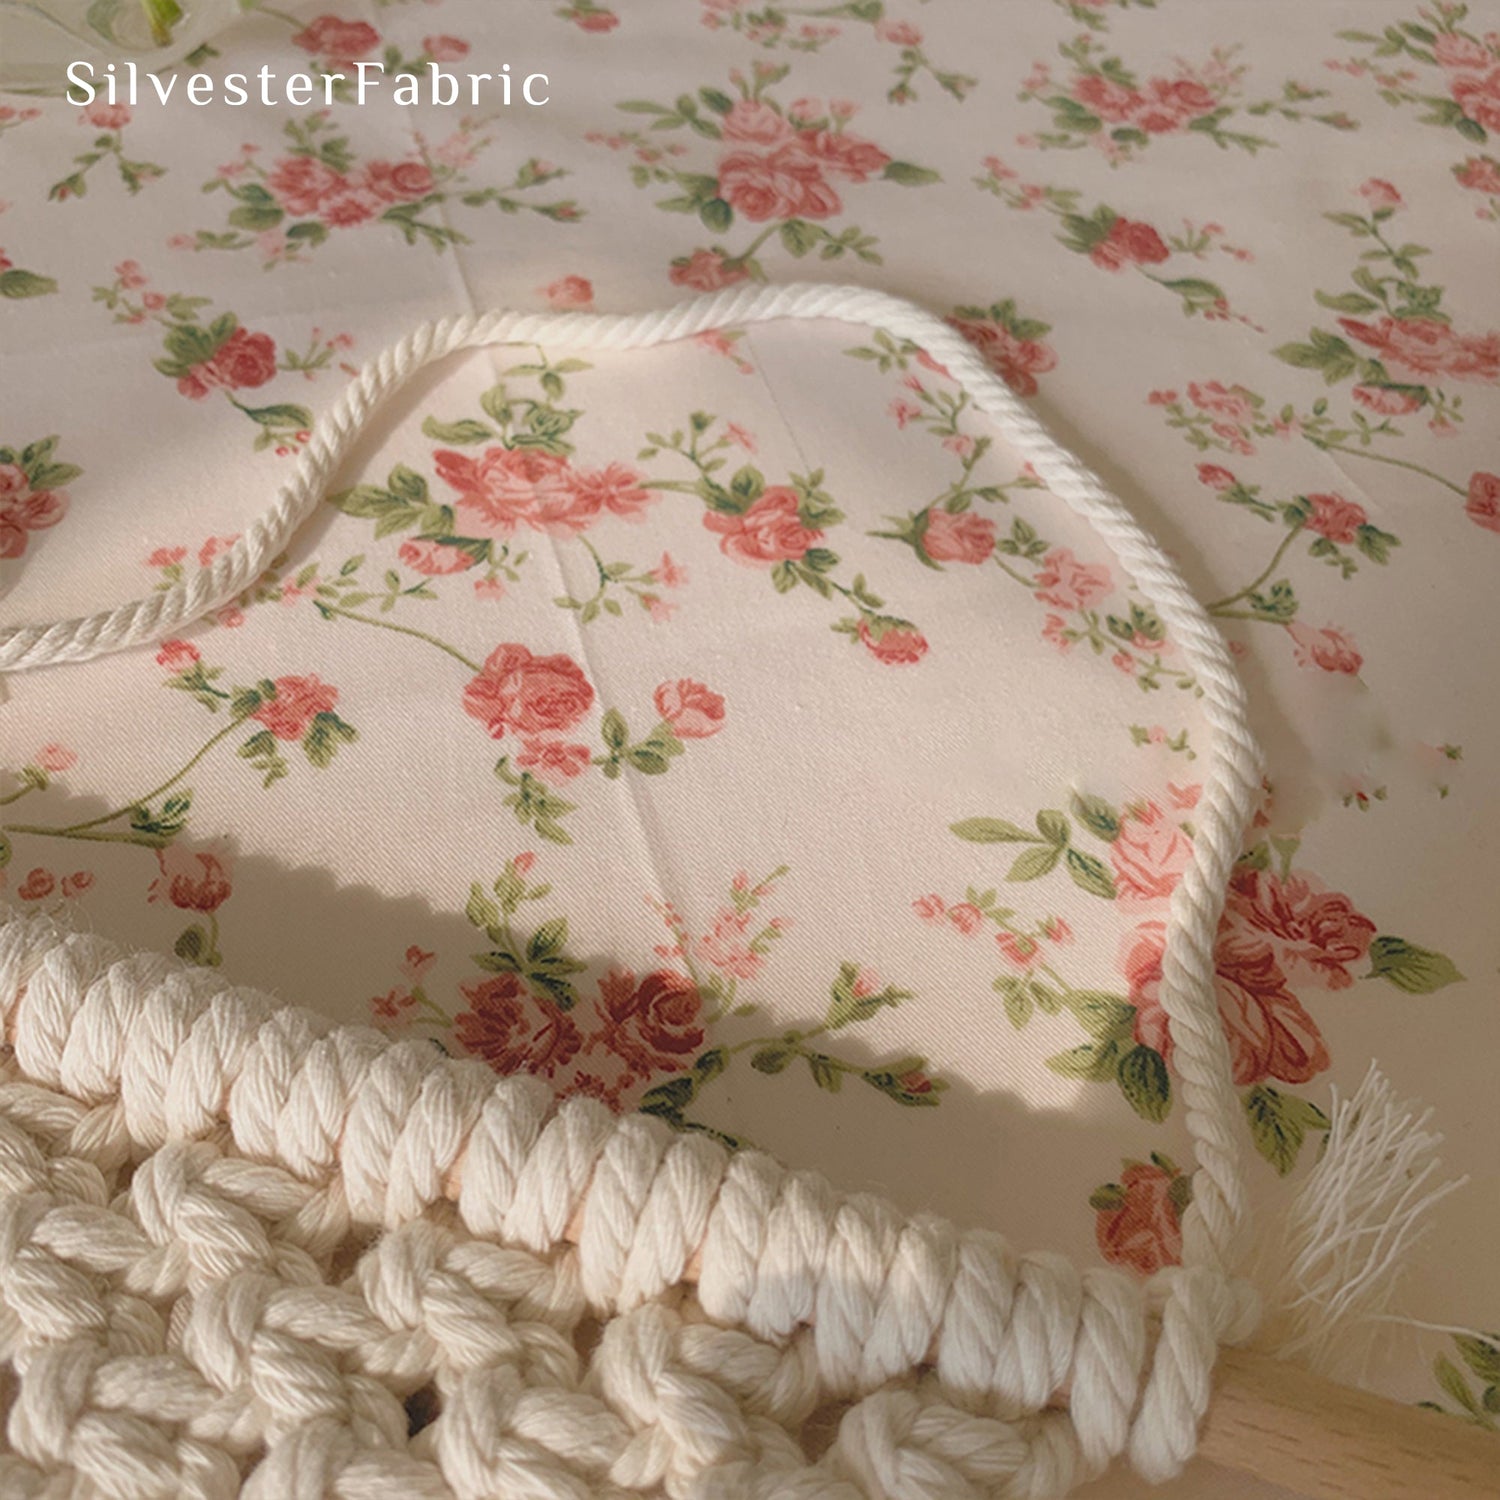 Cotton Tablecloth丨Free Shipping - SilvesterFabric